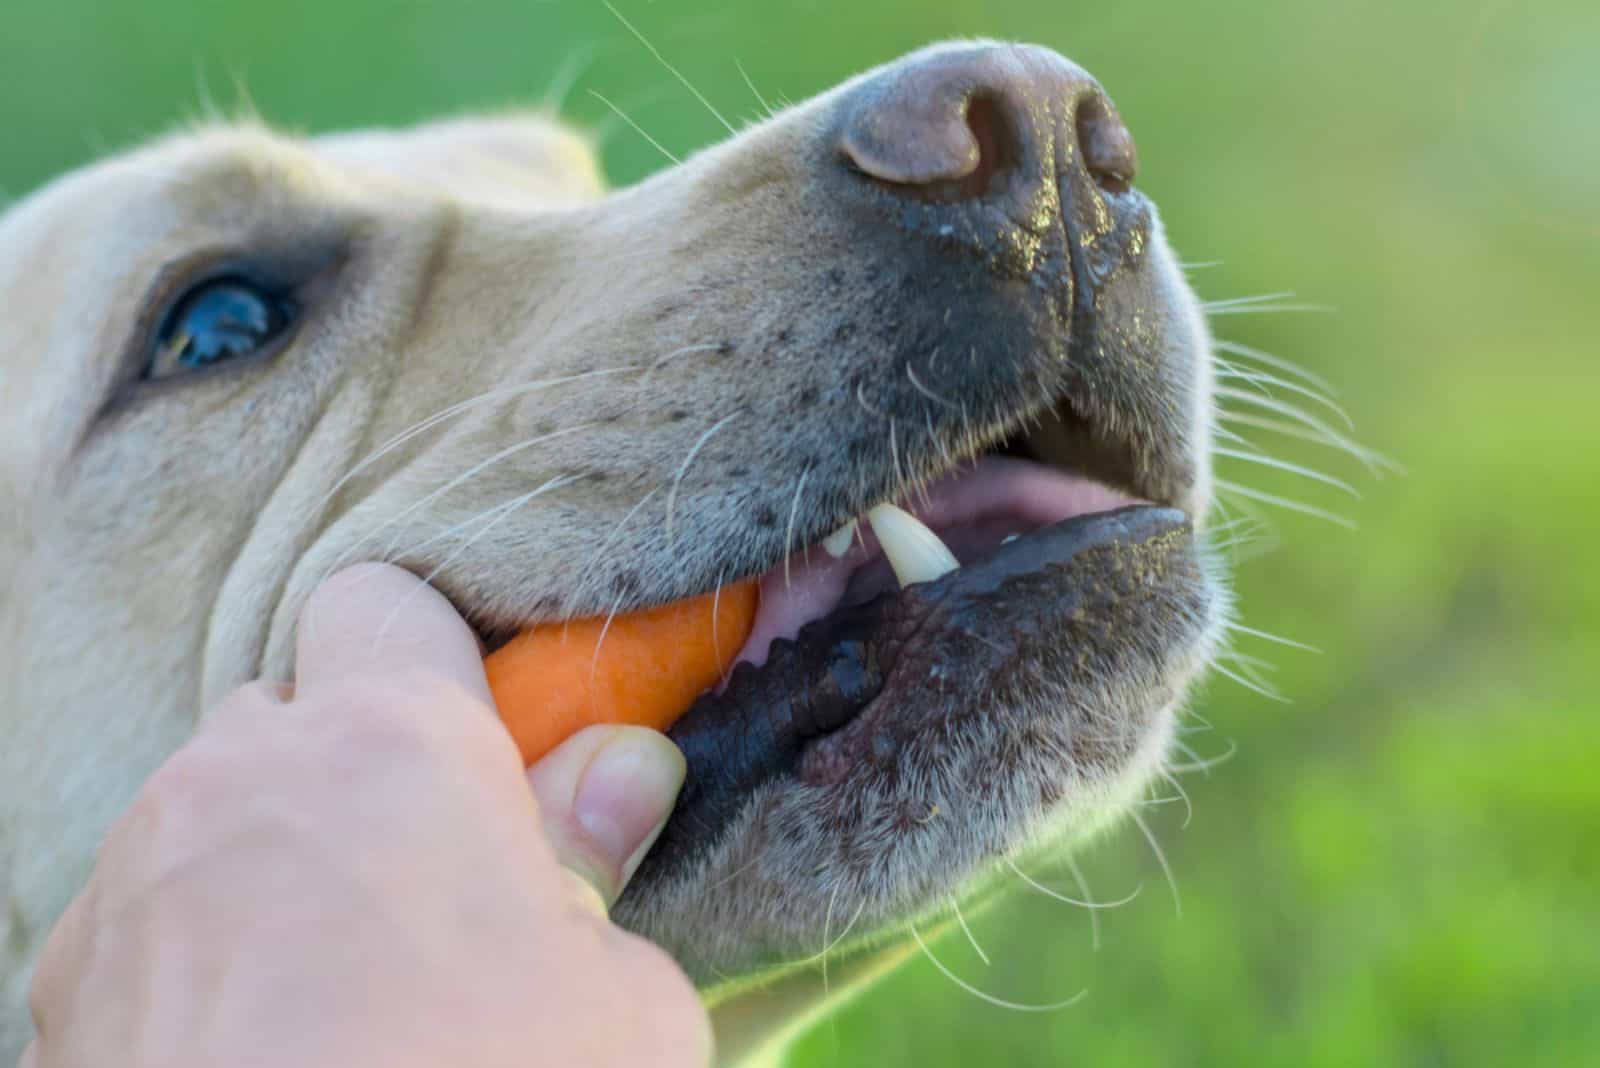 dog eating carrot from owner's hand